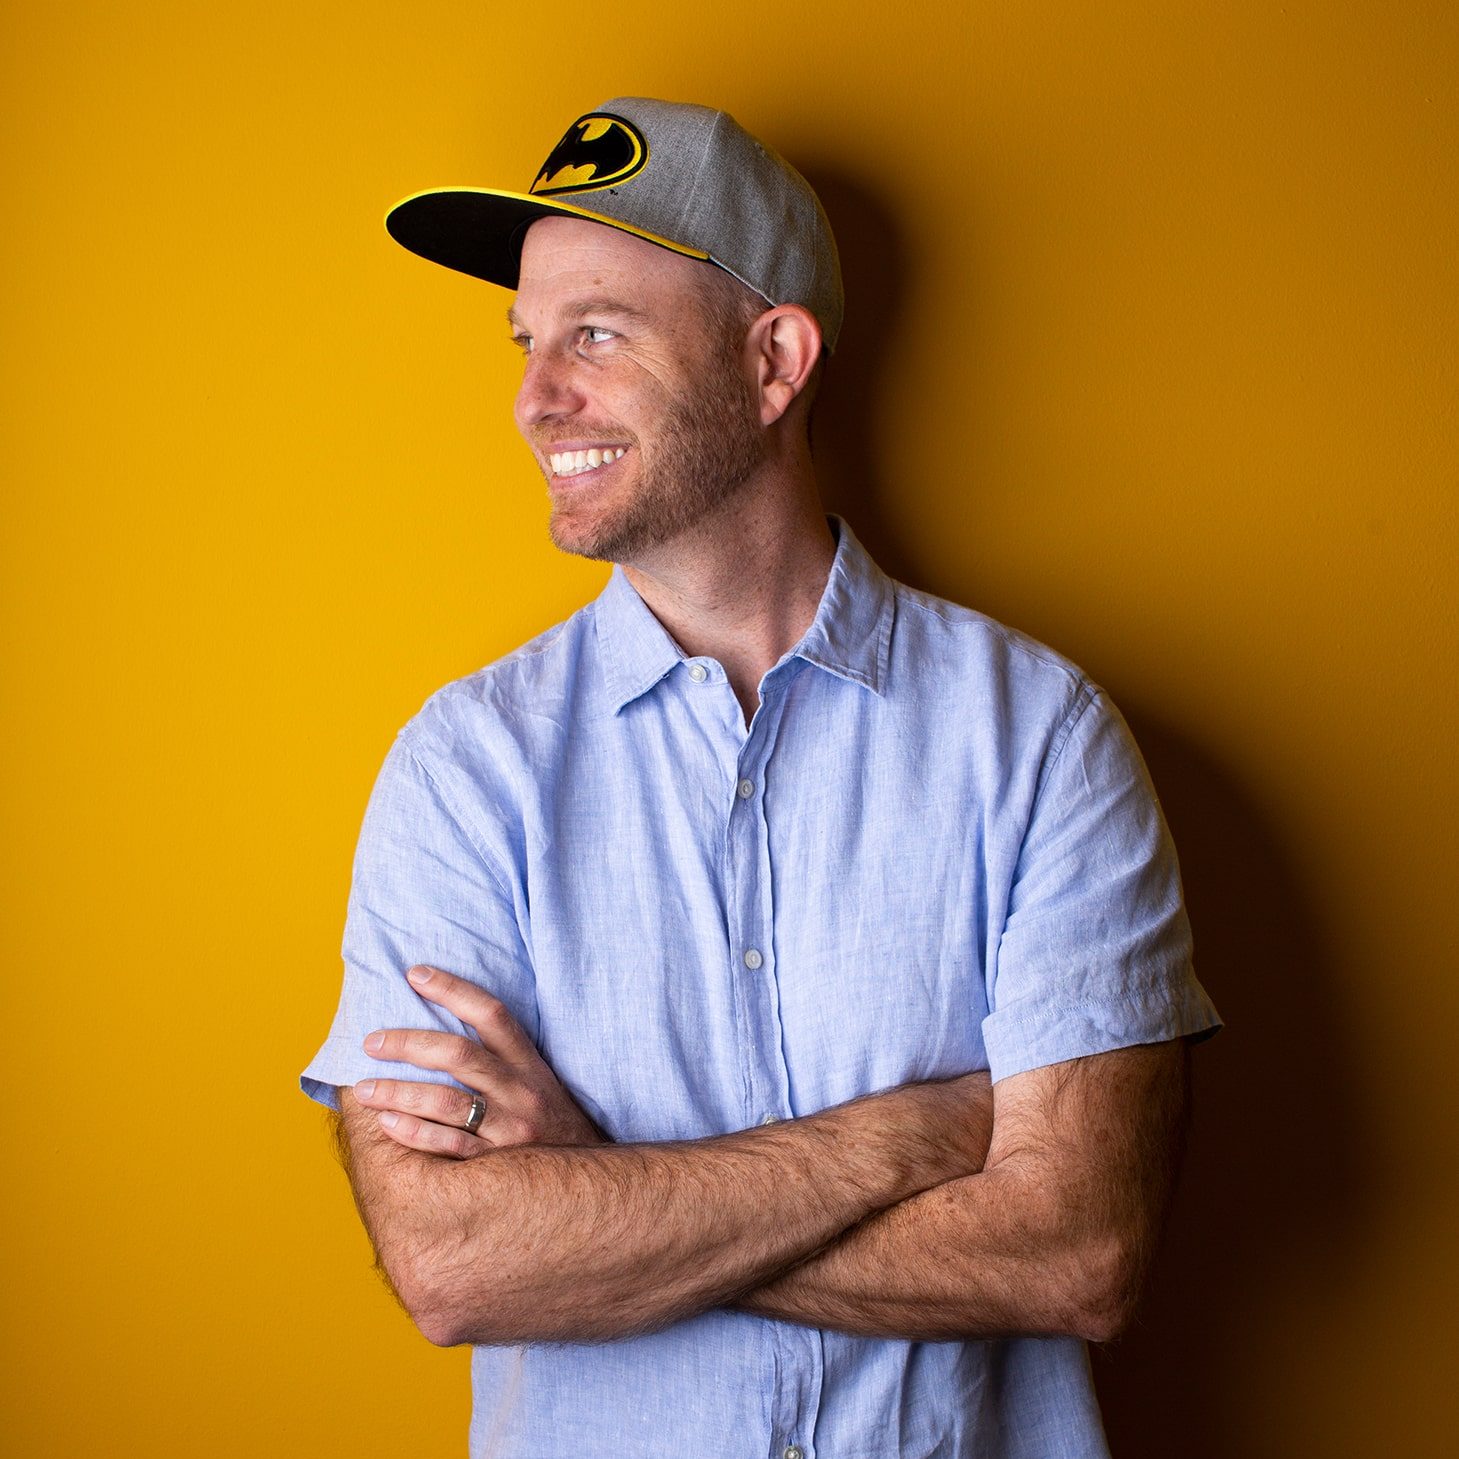 Profile of Gordon Howell in a Batman cap, smiling and looking to his right with hands folded on a dark yellow background